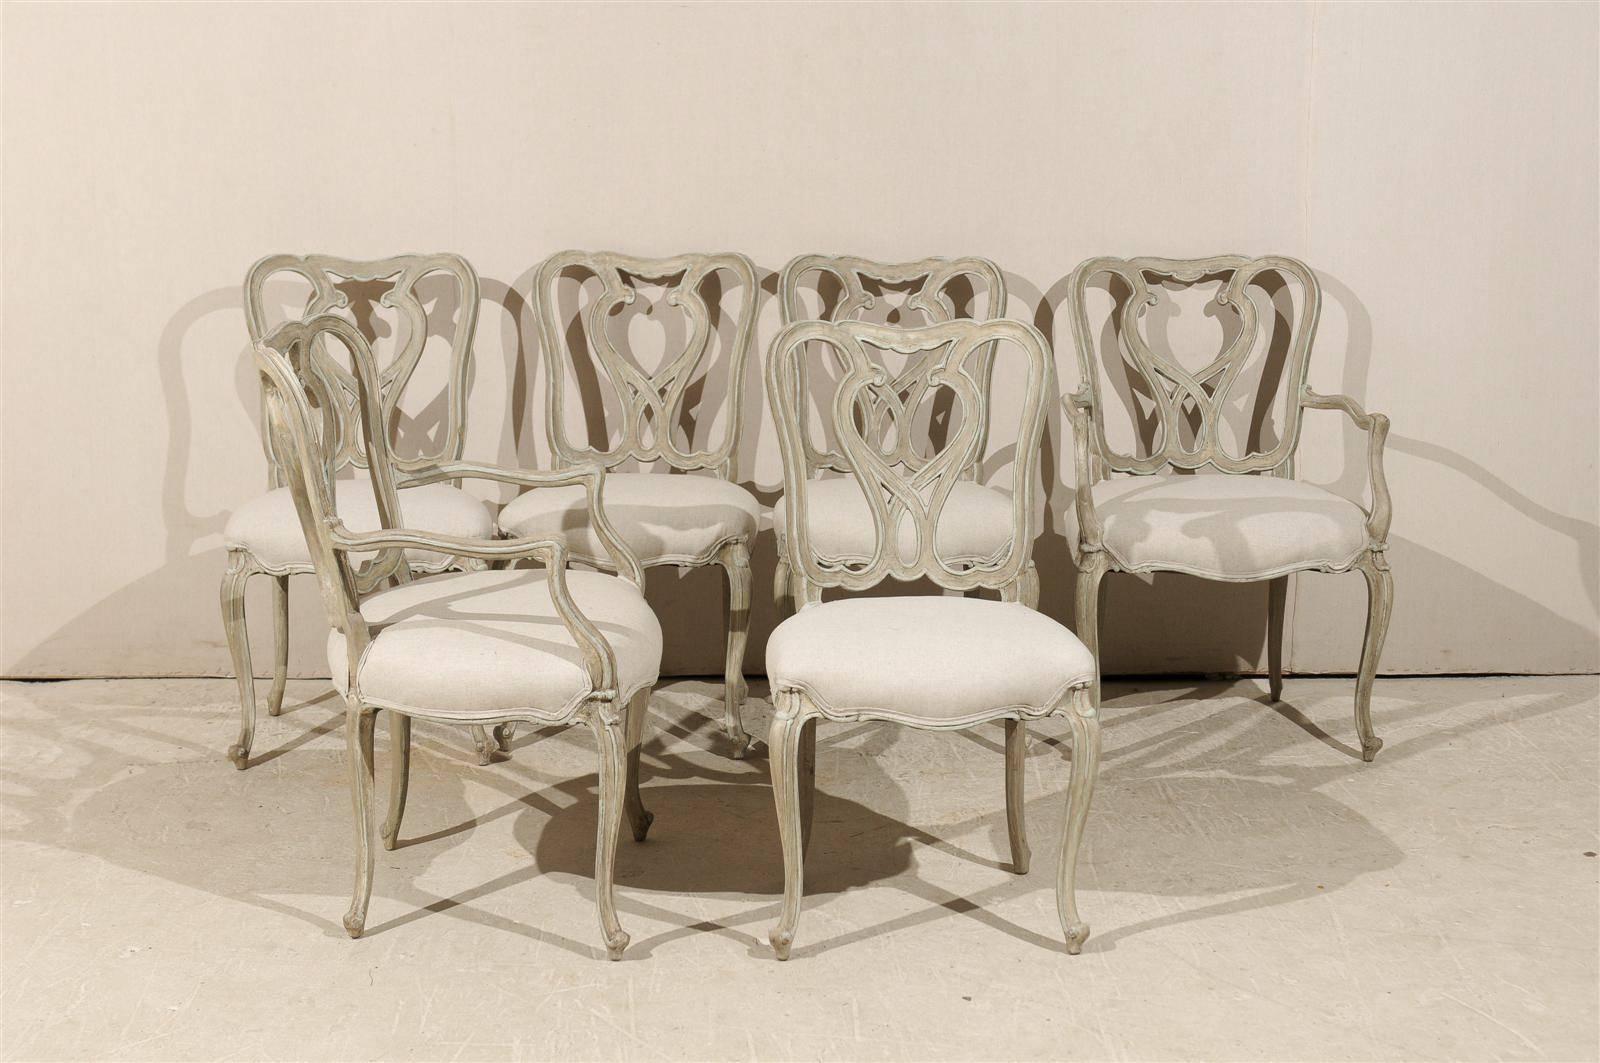 A set of six Venetian style painted wood dining room chairs with nicely carved back, cabriole legs, seats reupholstered in Belgian linen. From the 20th century. Please note that the dimensions for these Venetian style chairs noted below are for the